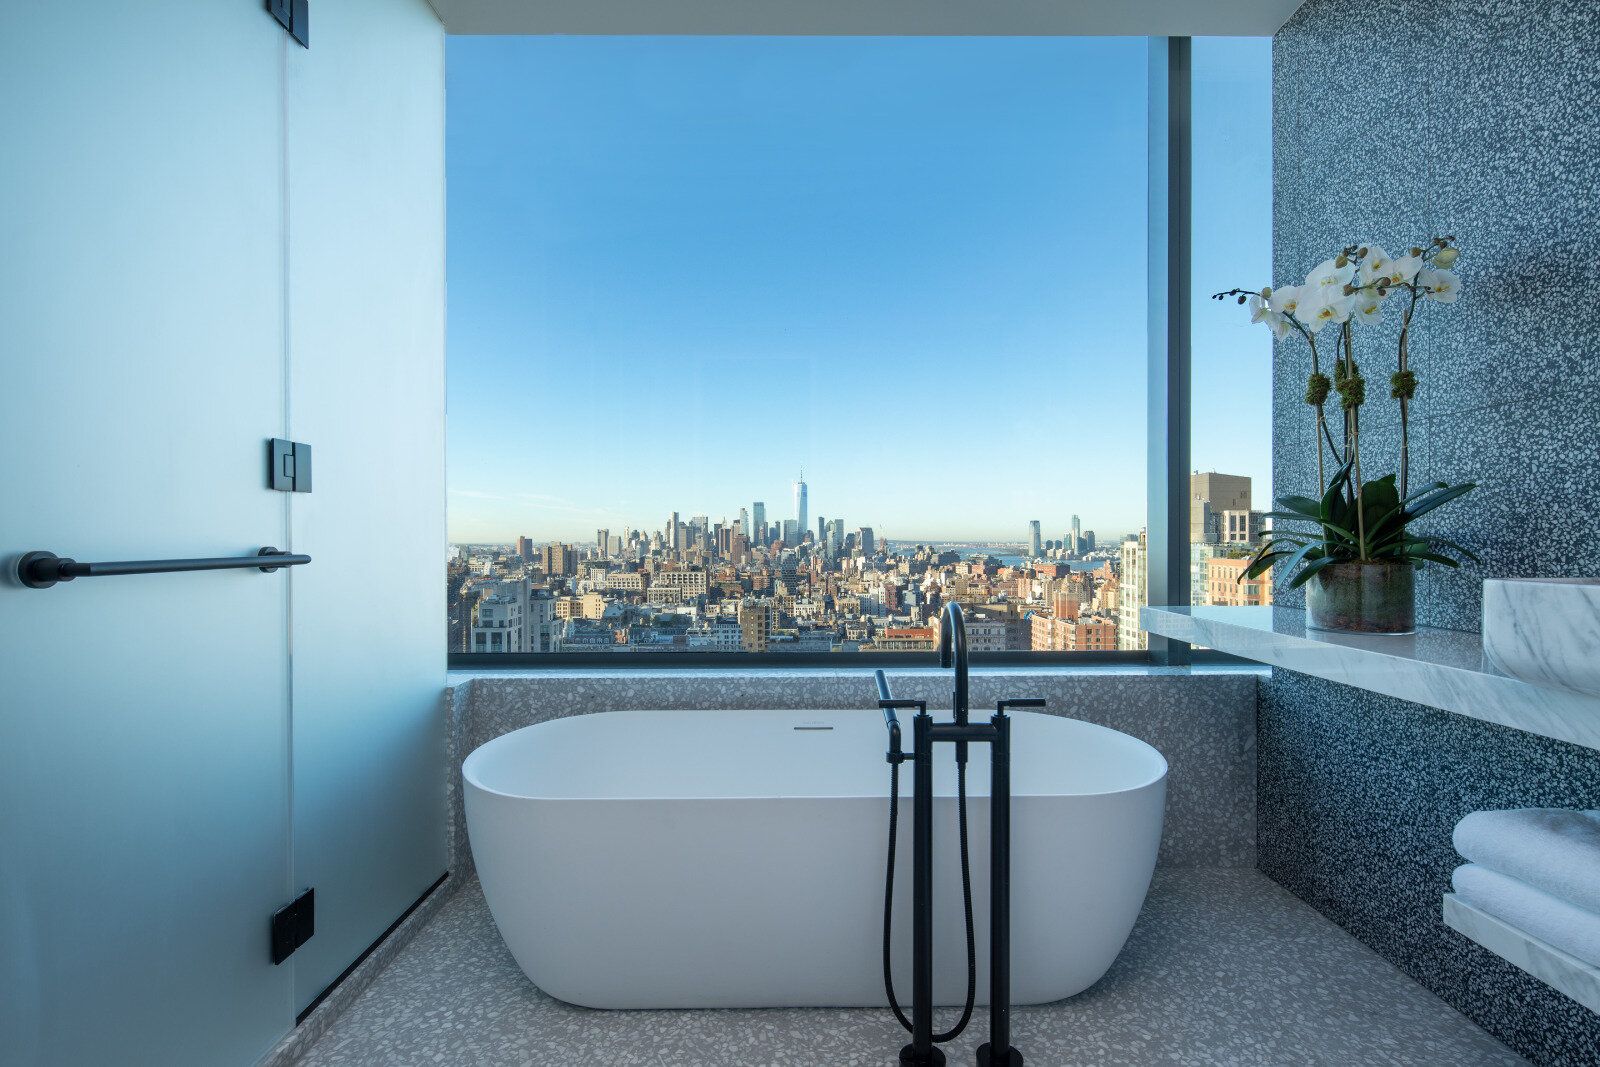 City view from The Ritz-Carlton's bathroom